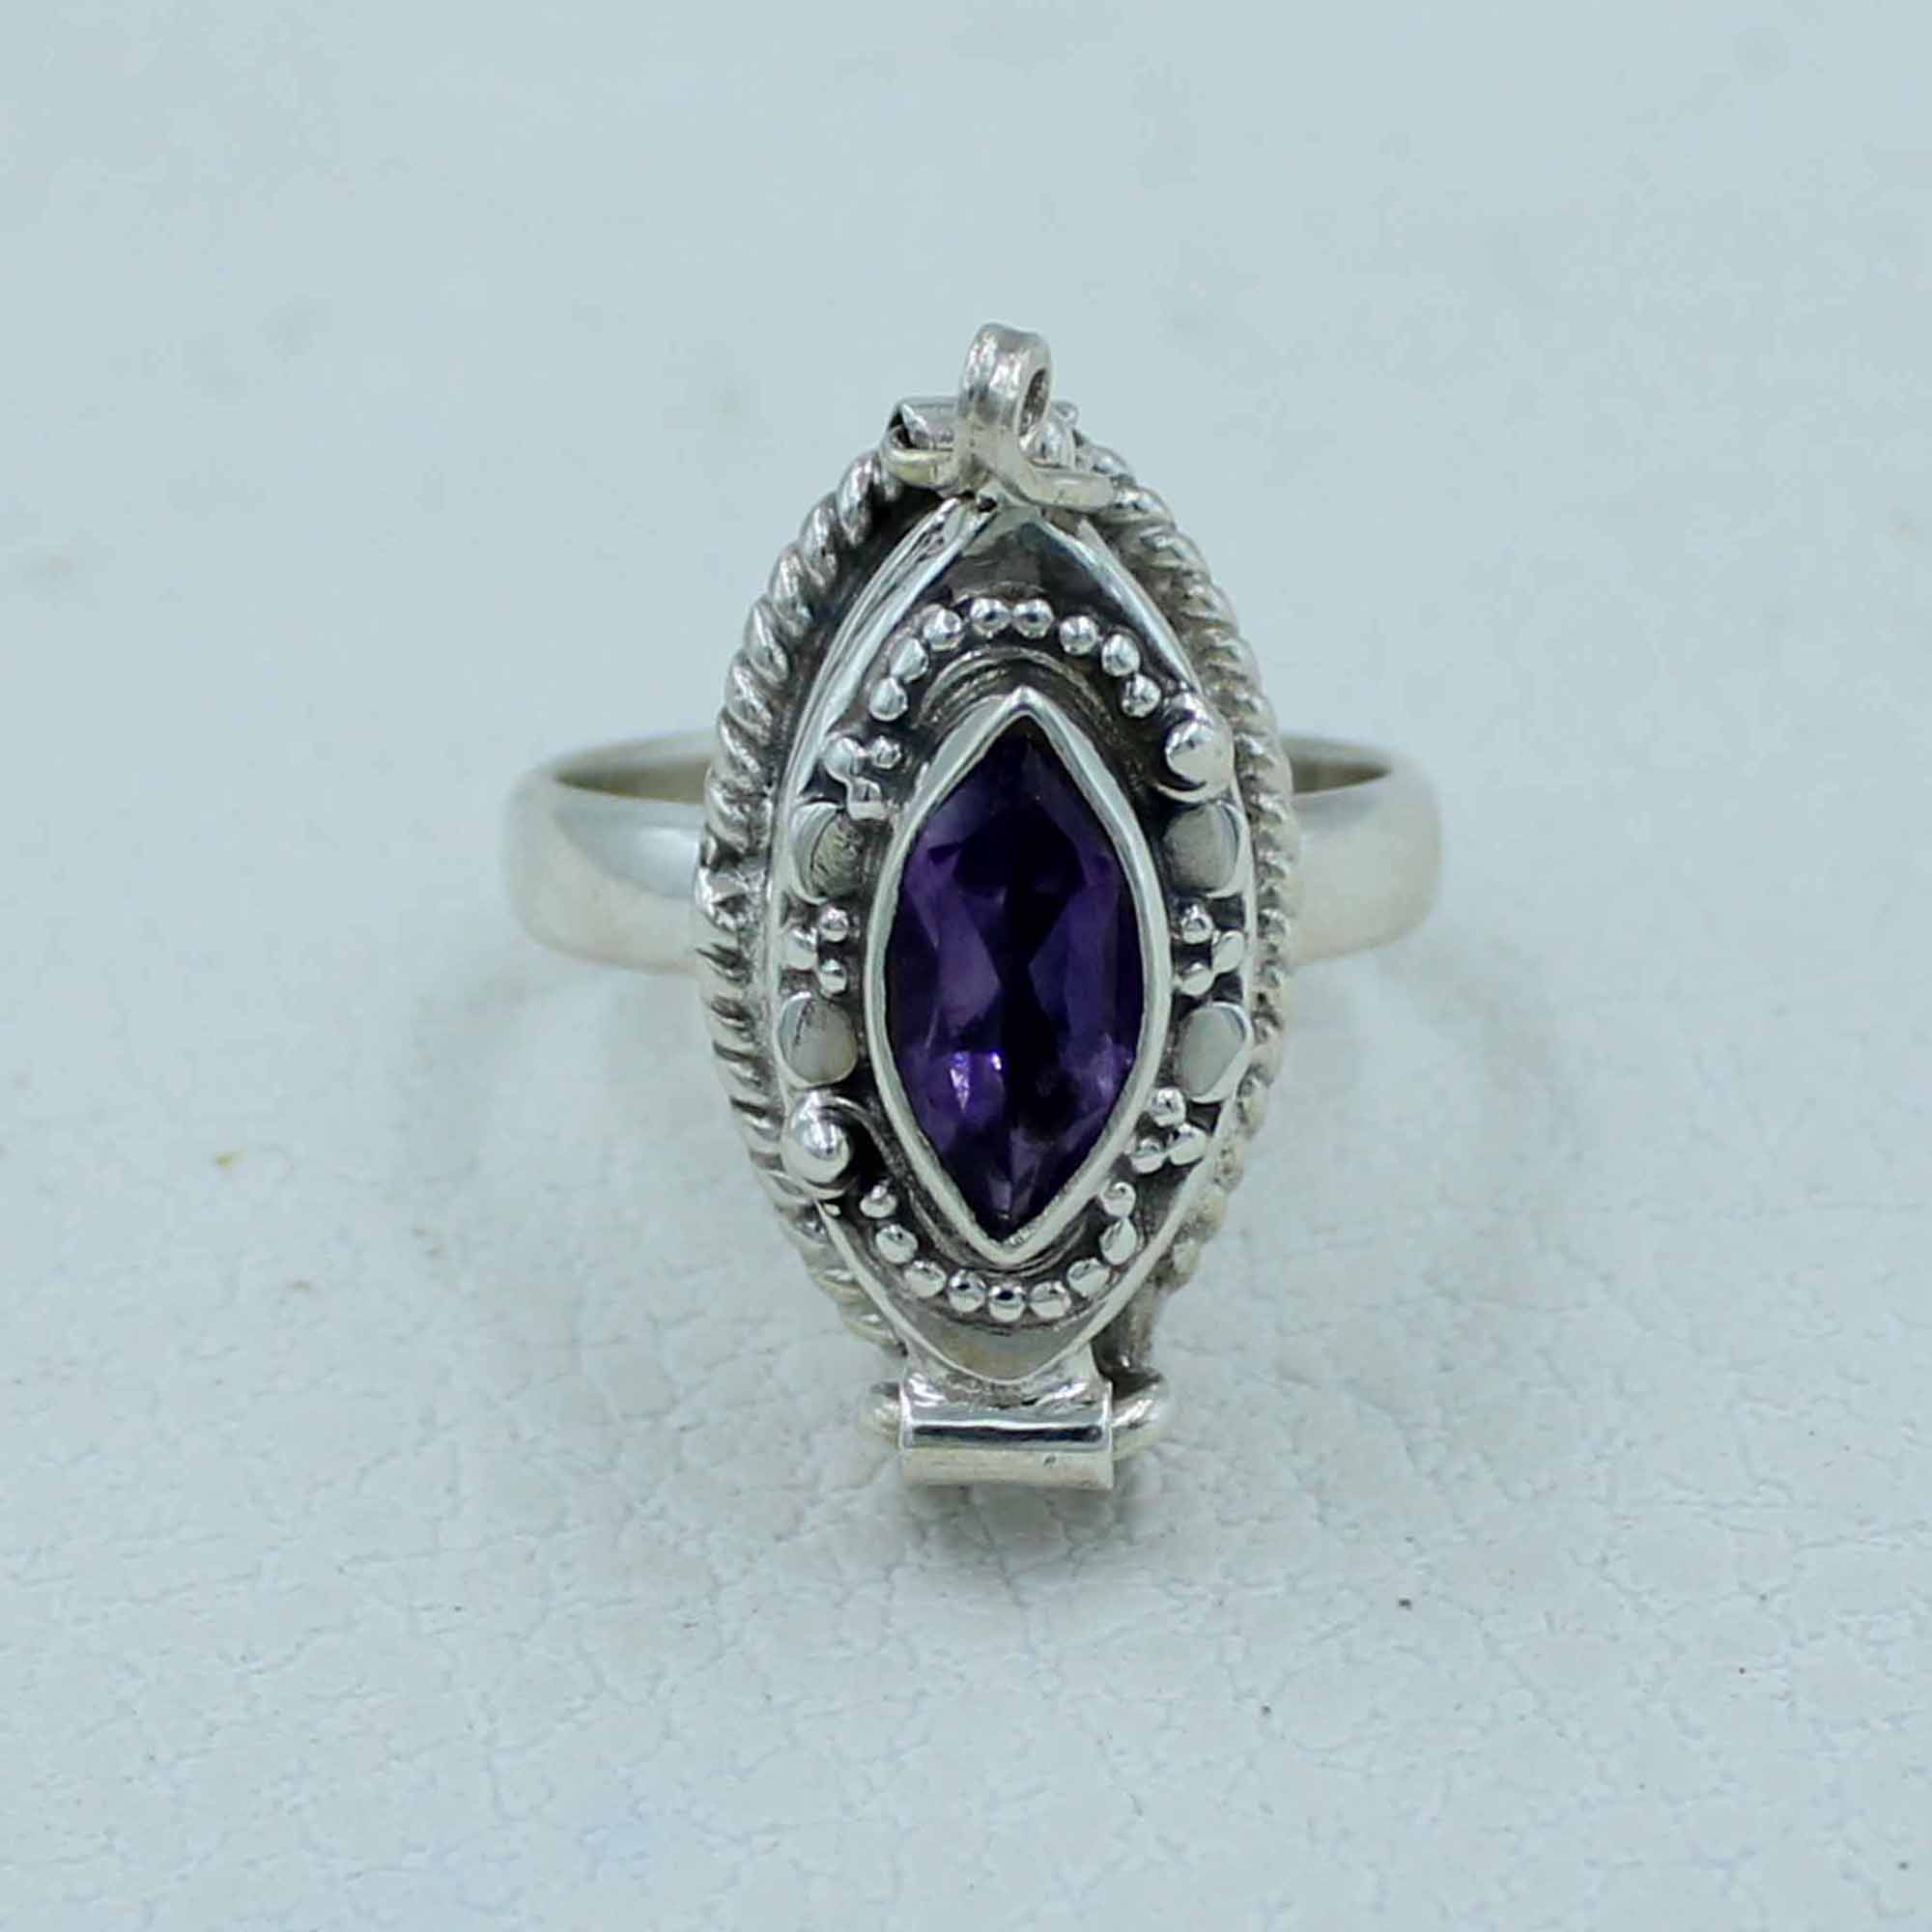 Natural Amethyst 925 Silver Ring - Poison Box Jewelry